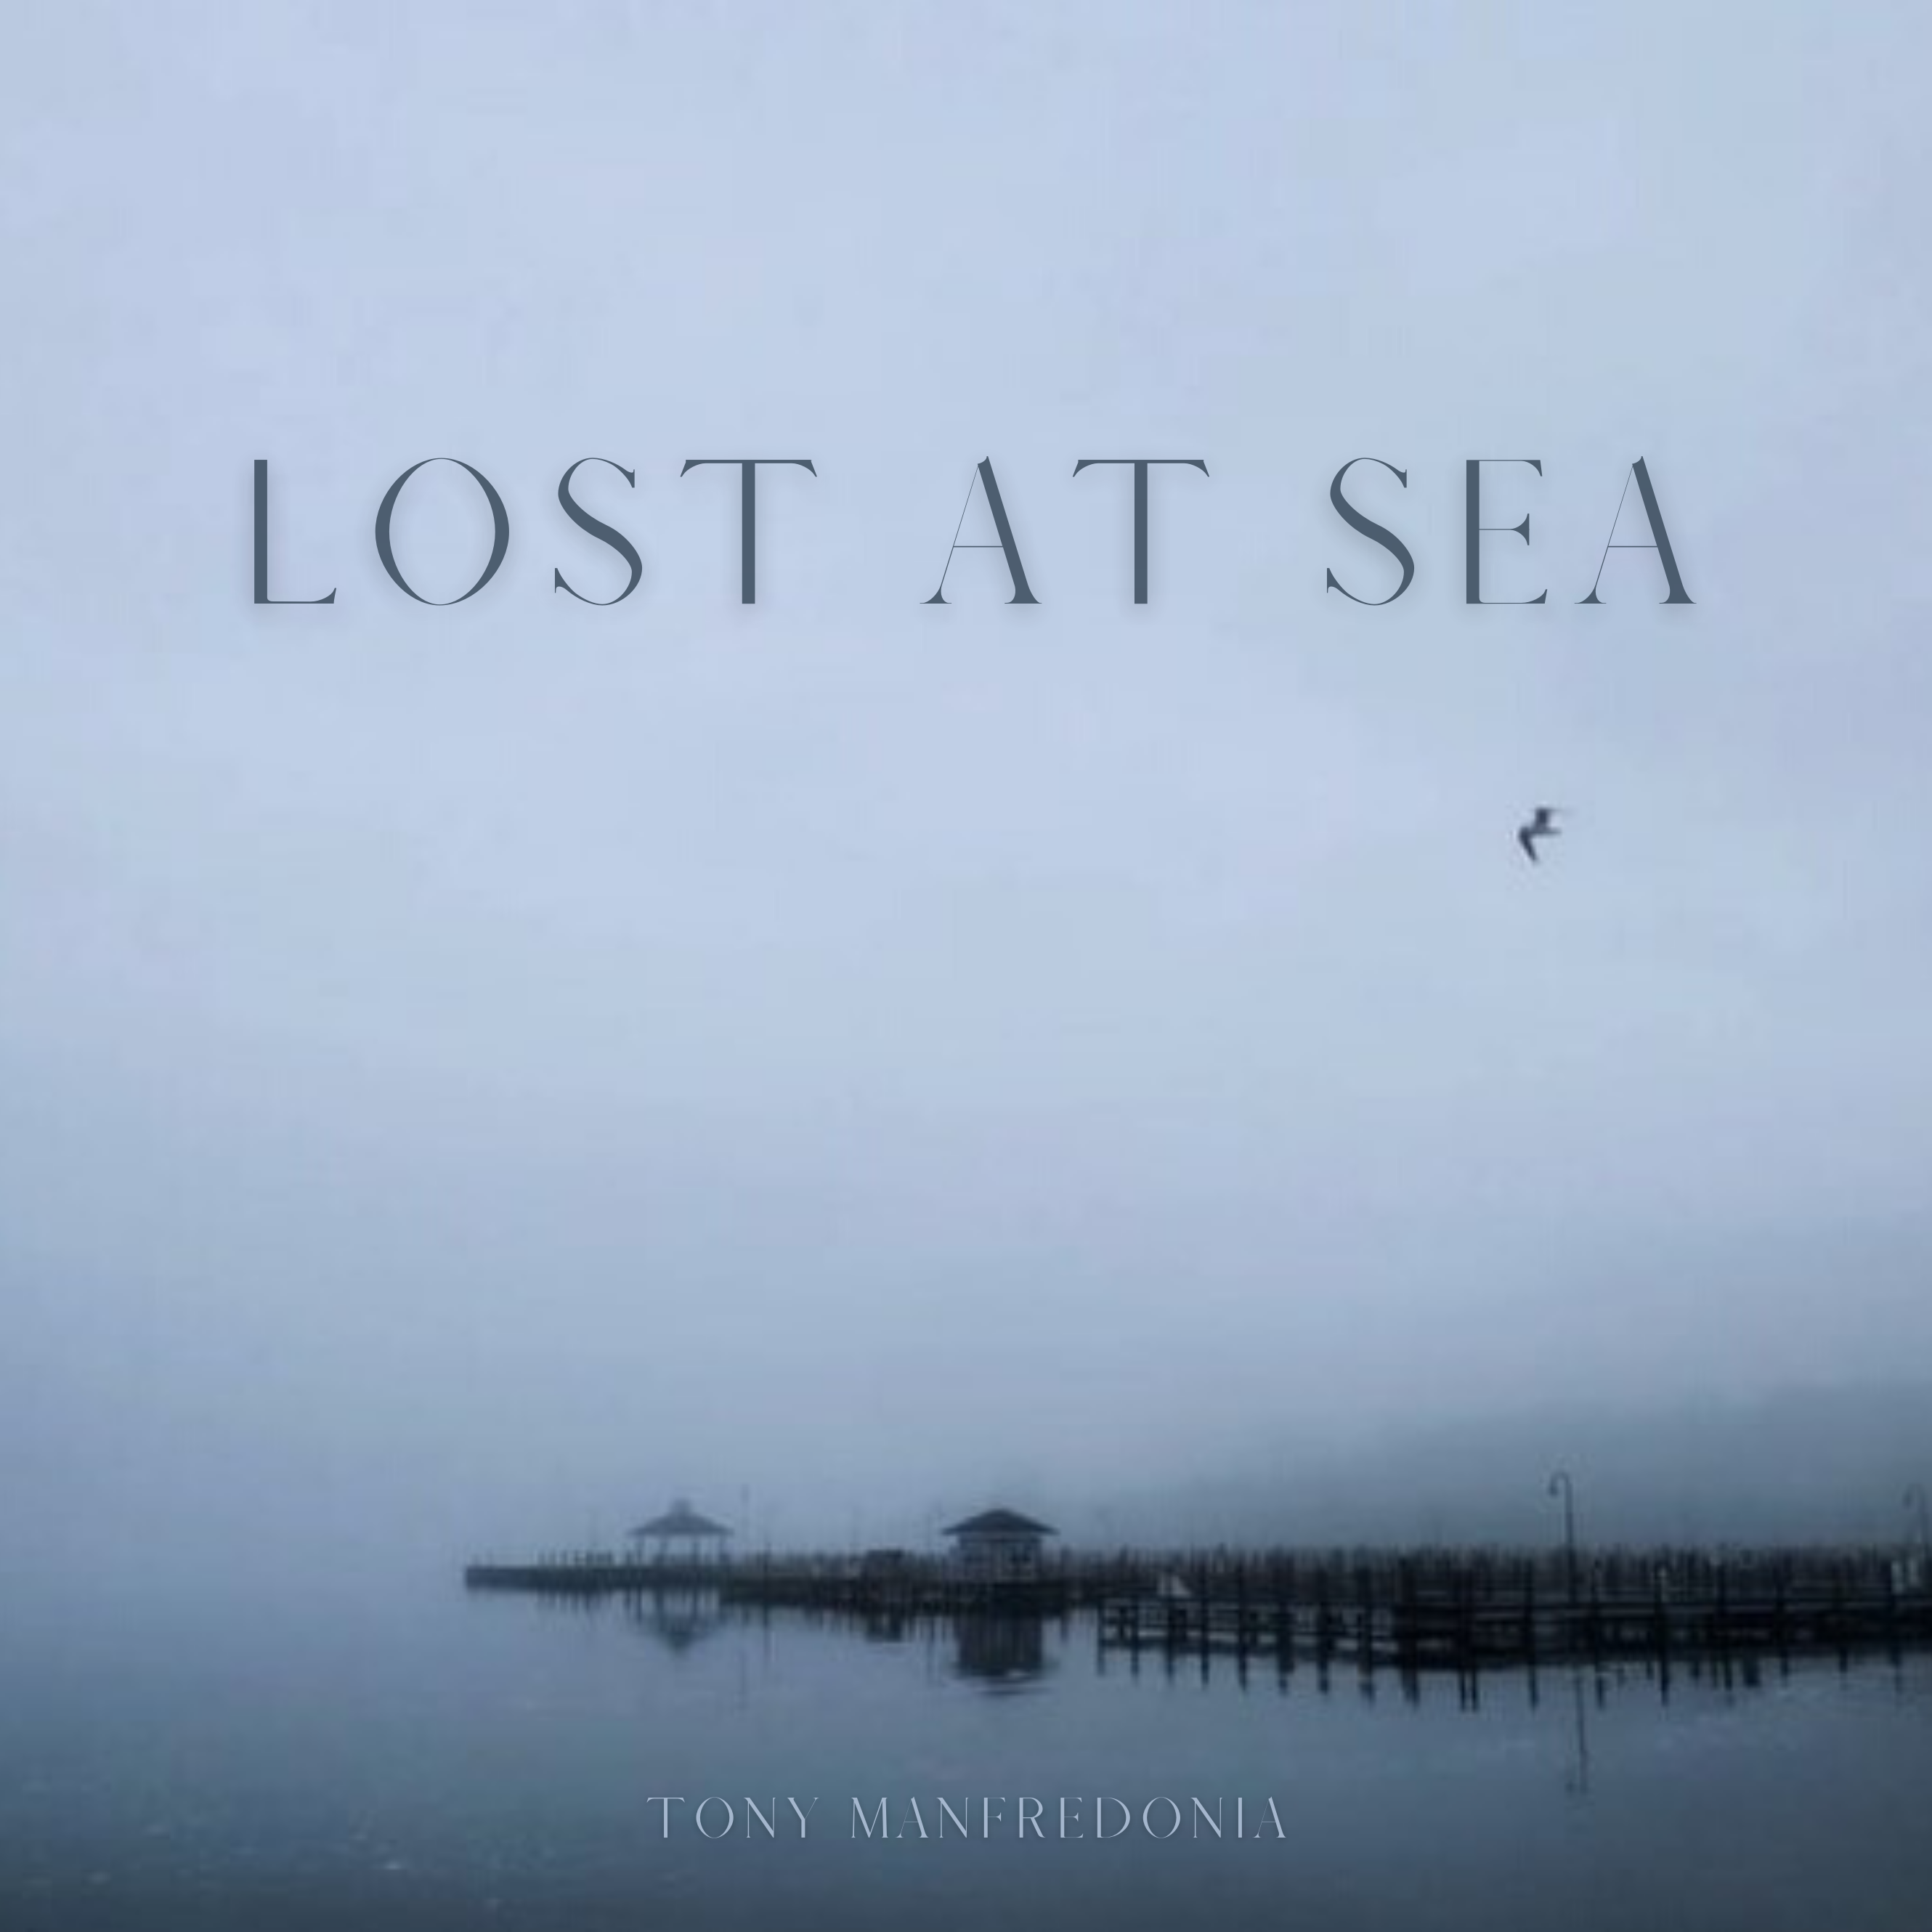 Tony Manfredonia is a Michigan-based composer and orchestrator who releases new E.P  ‘Lost at Sea’